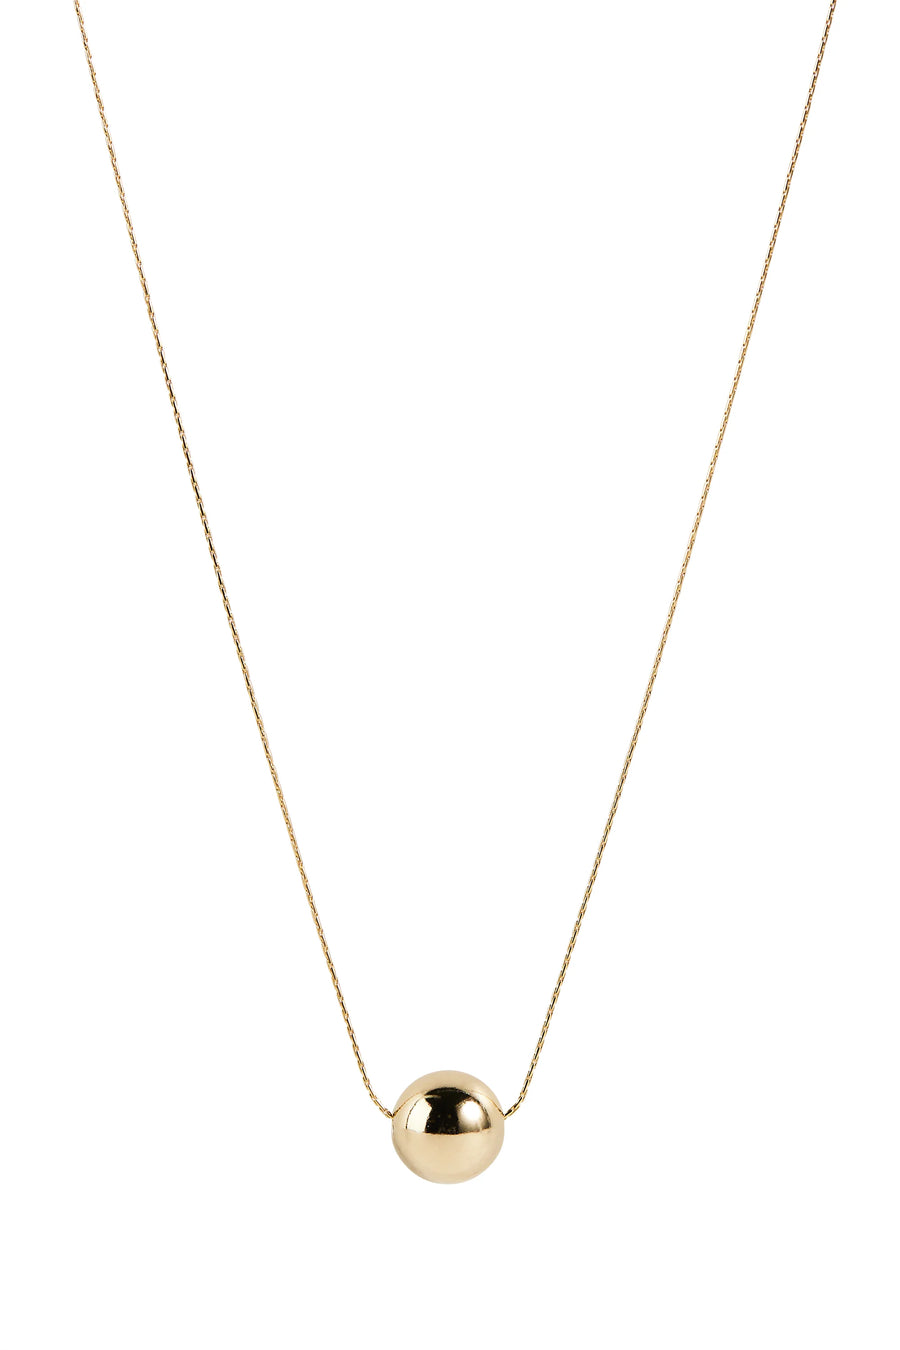 LISBETH JEWELRY - DODI NECKLACE - FILLED GOLD